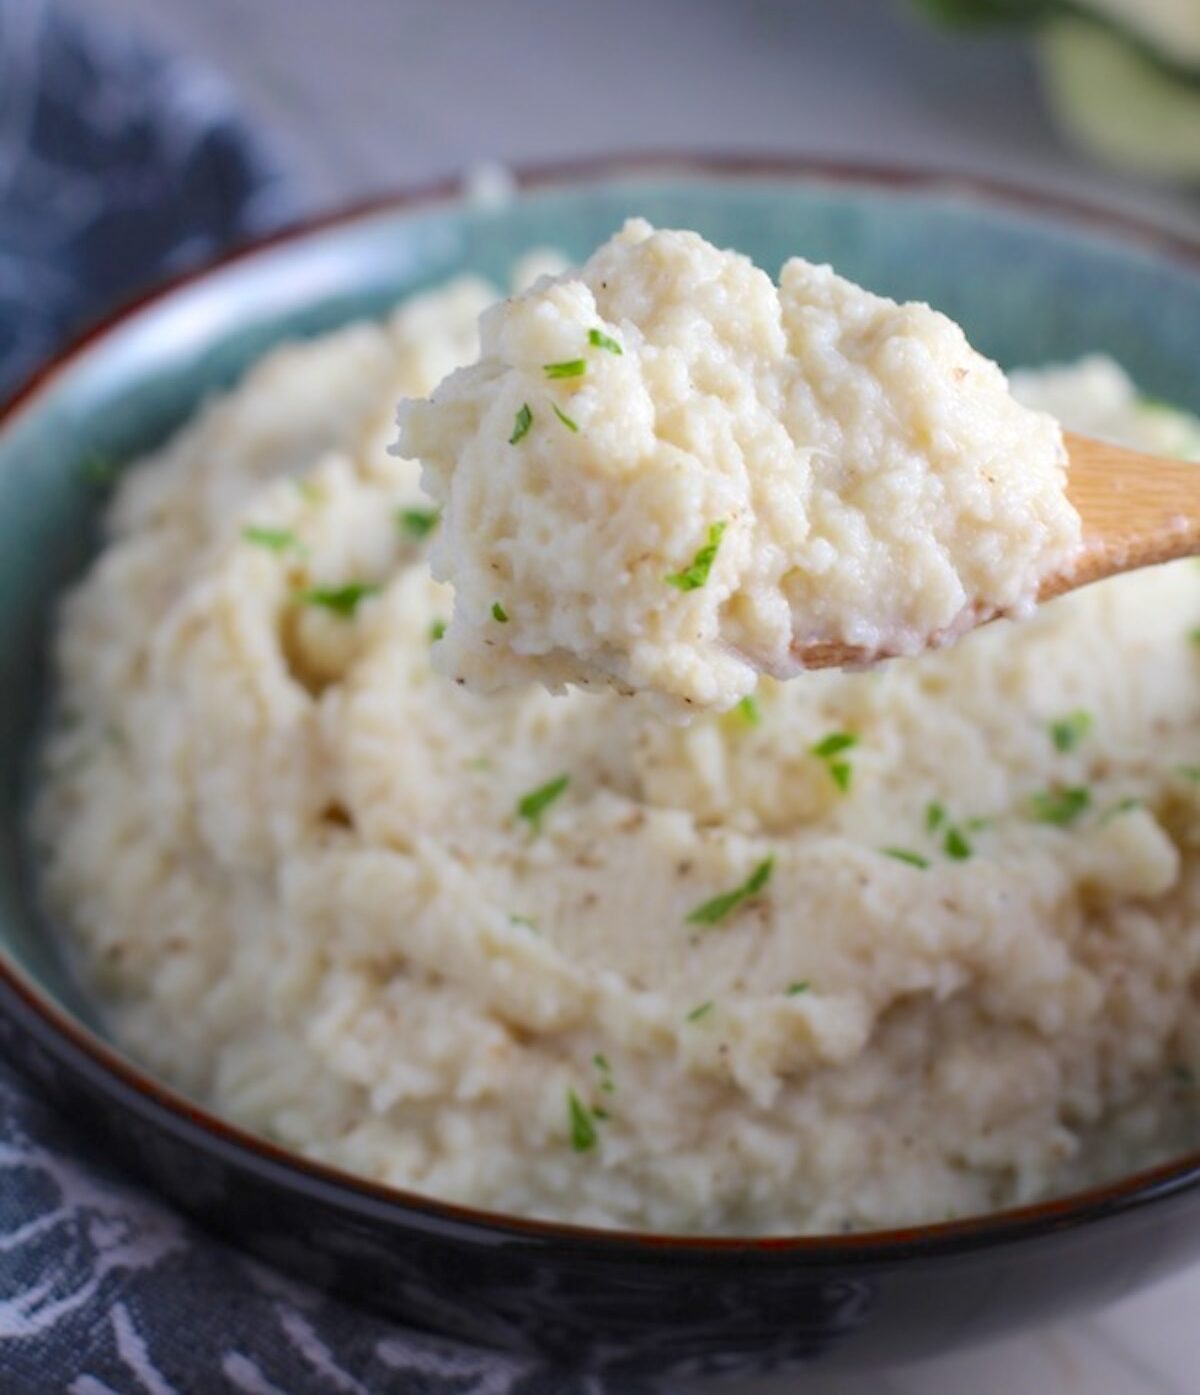 Mashed Roasted Cauliflower in a bowl with spoon scooping. The texture is perfectly creamy and along with the flavor, mimics mashed potatoes.